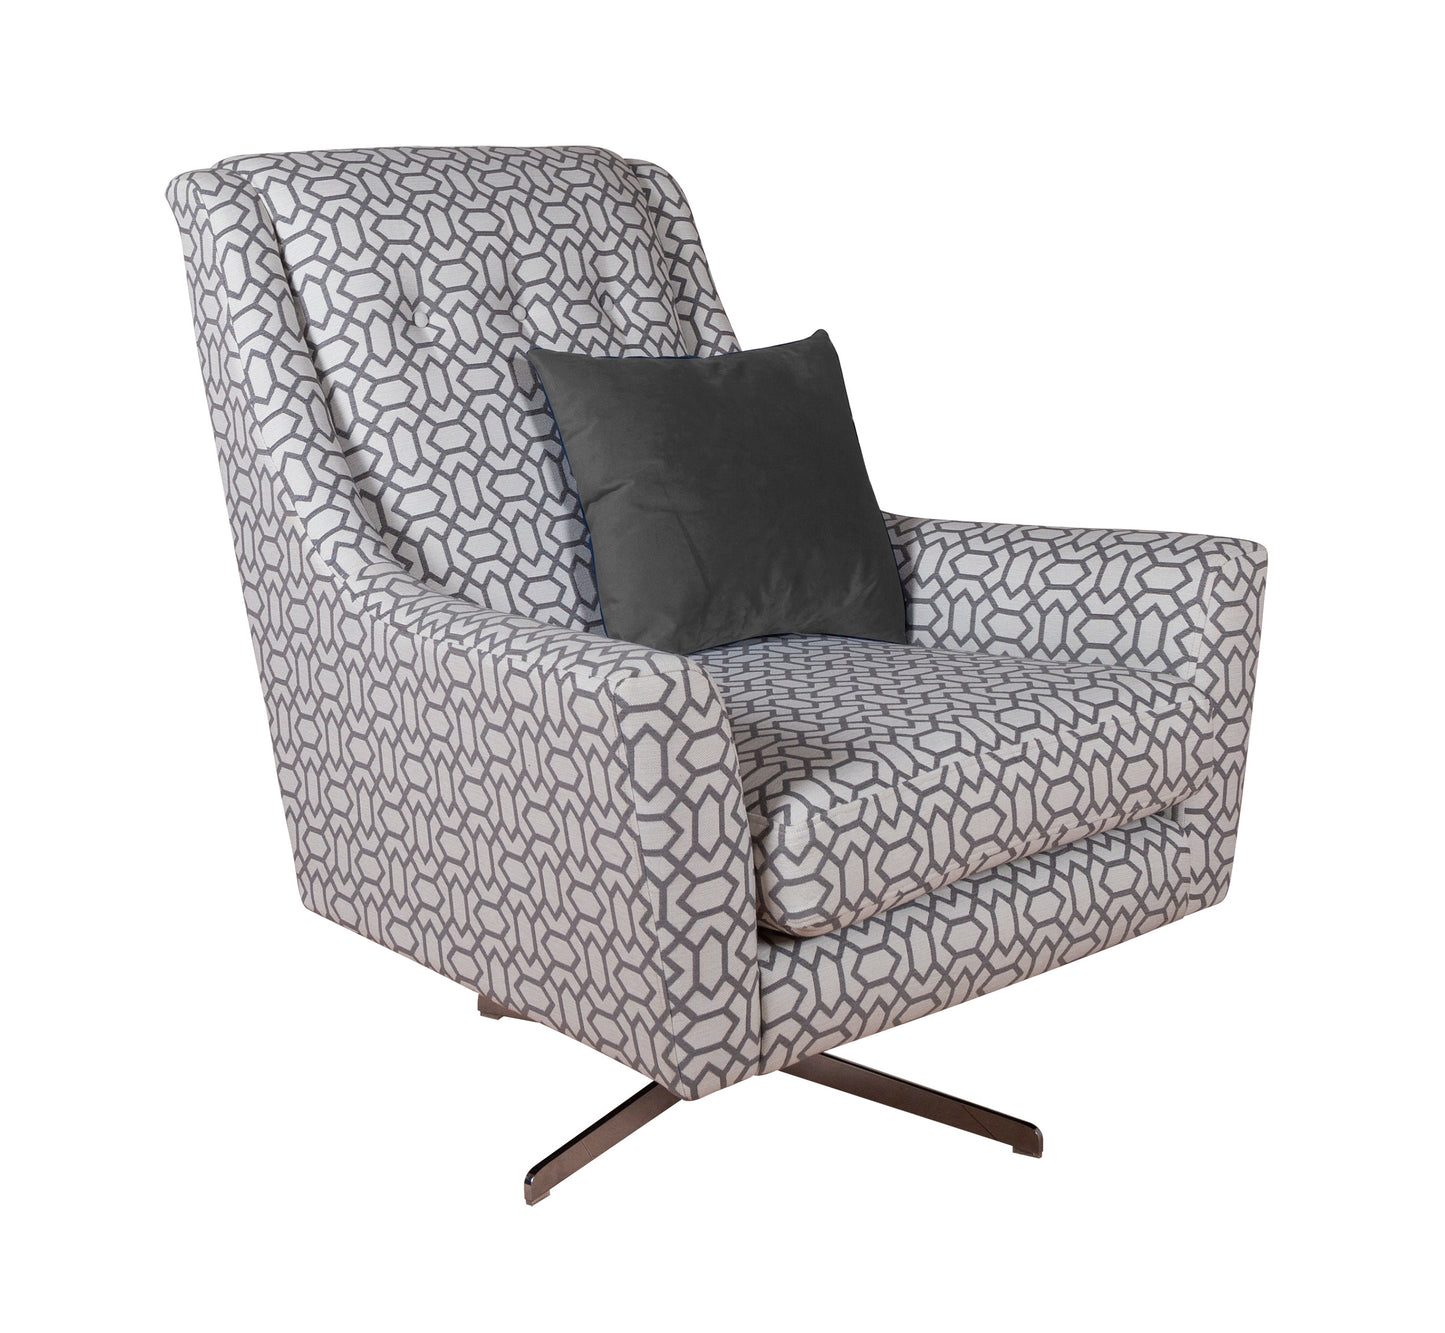 Chic Salute Patterned Swivel Accent Chair